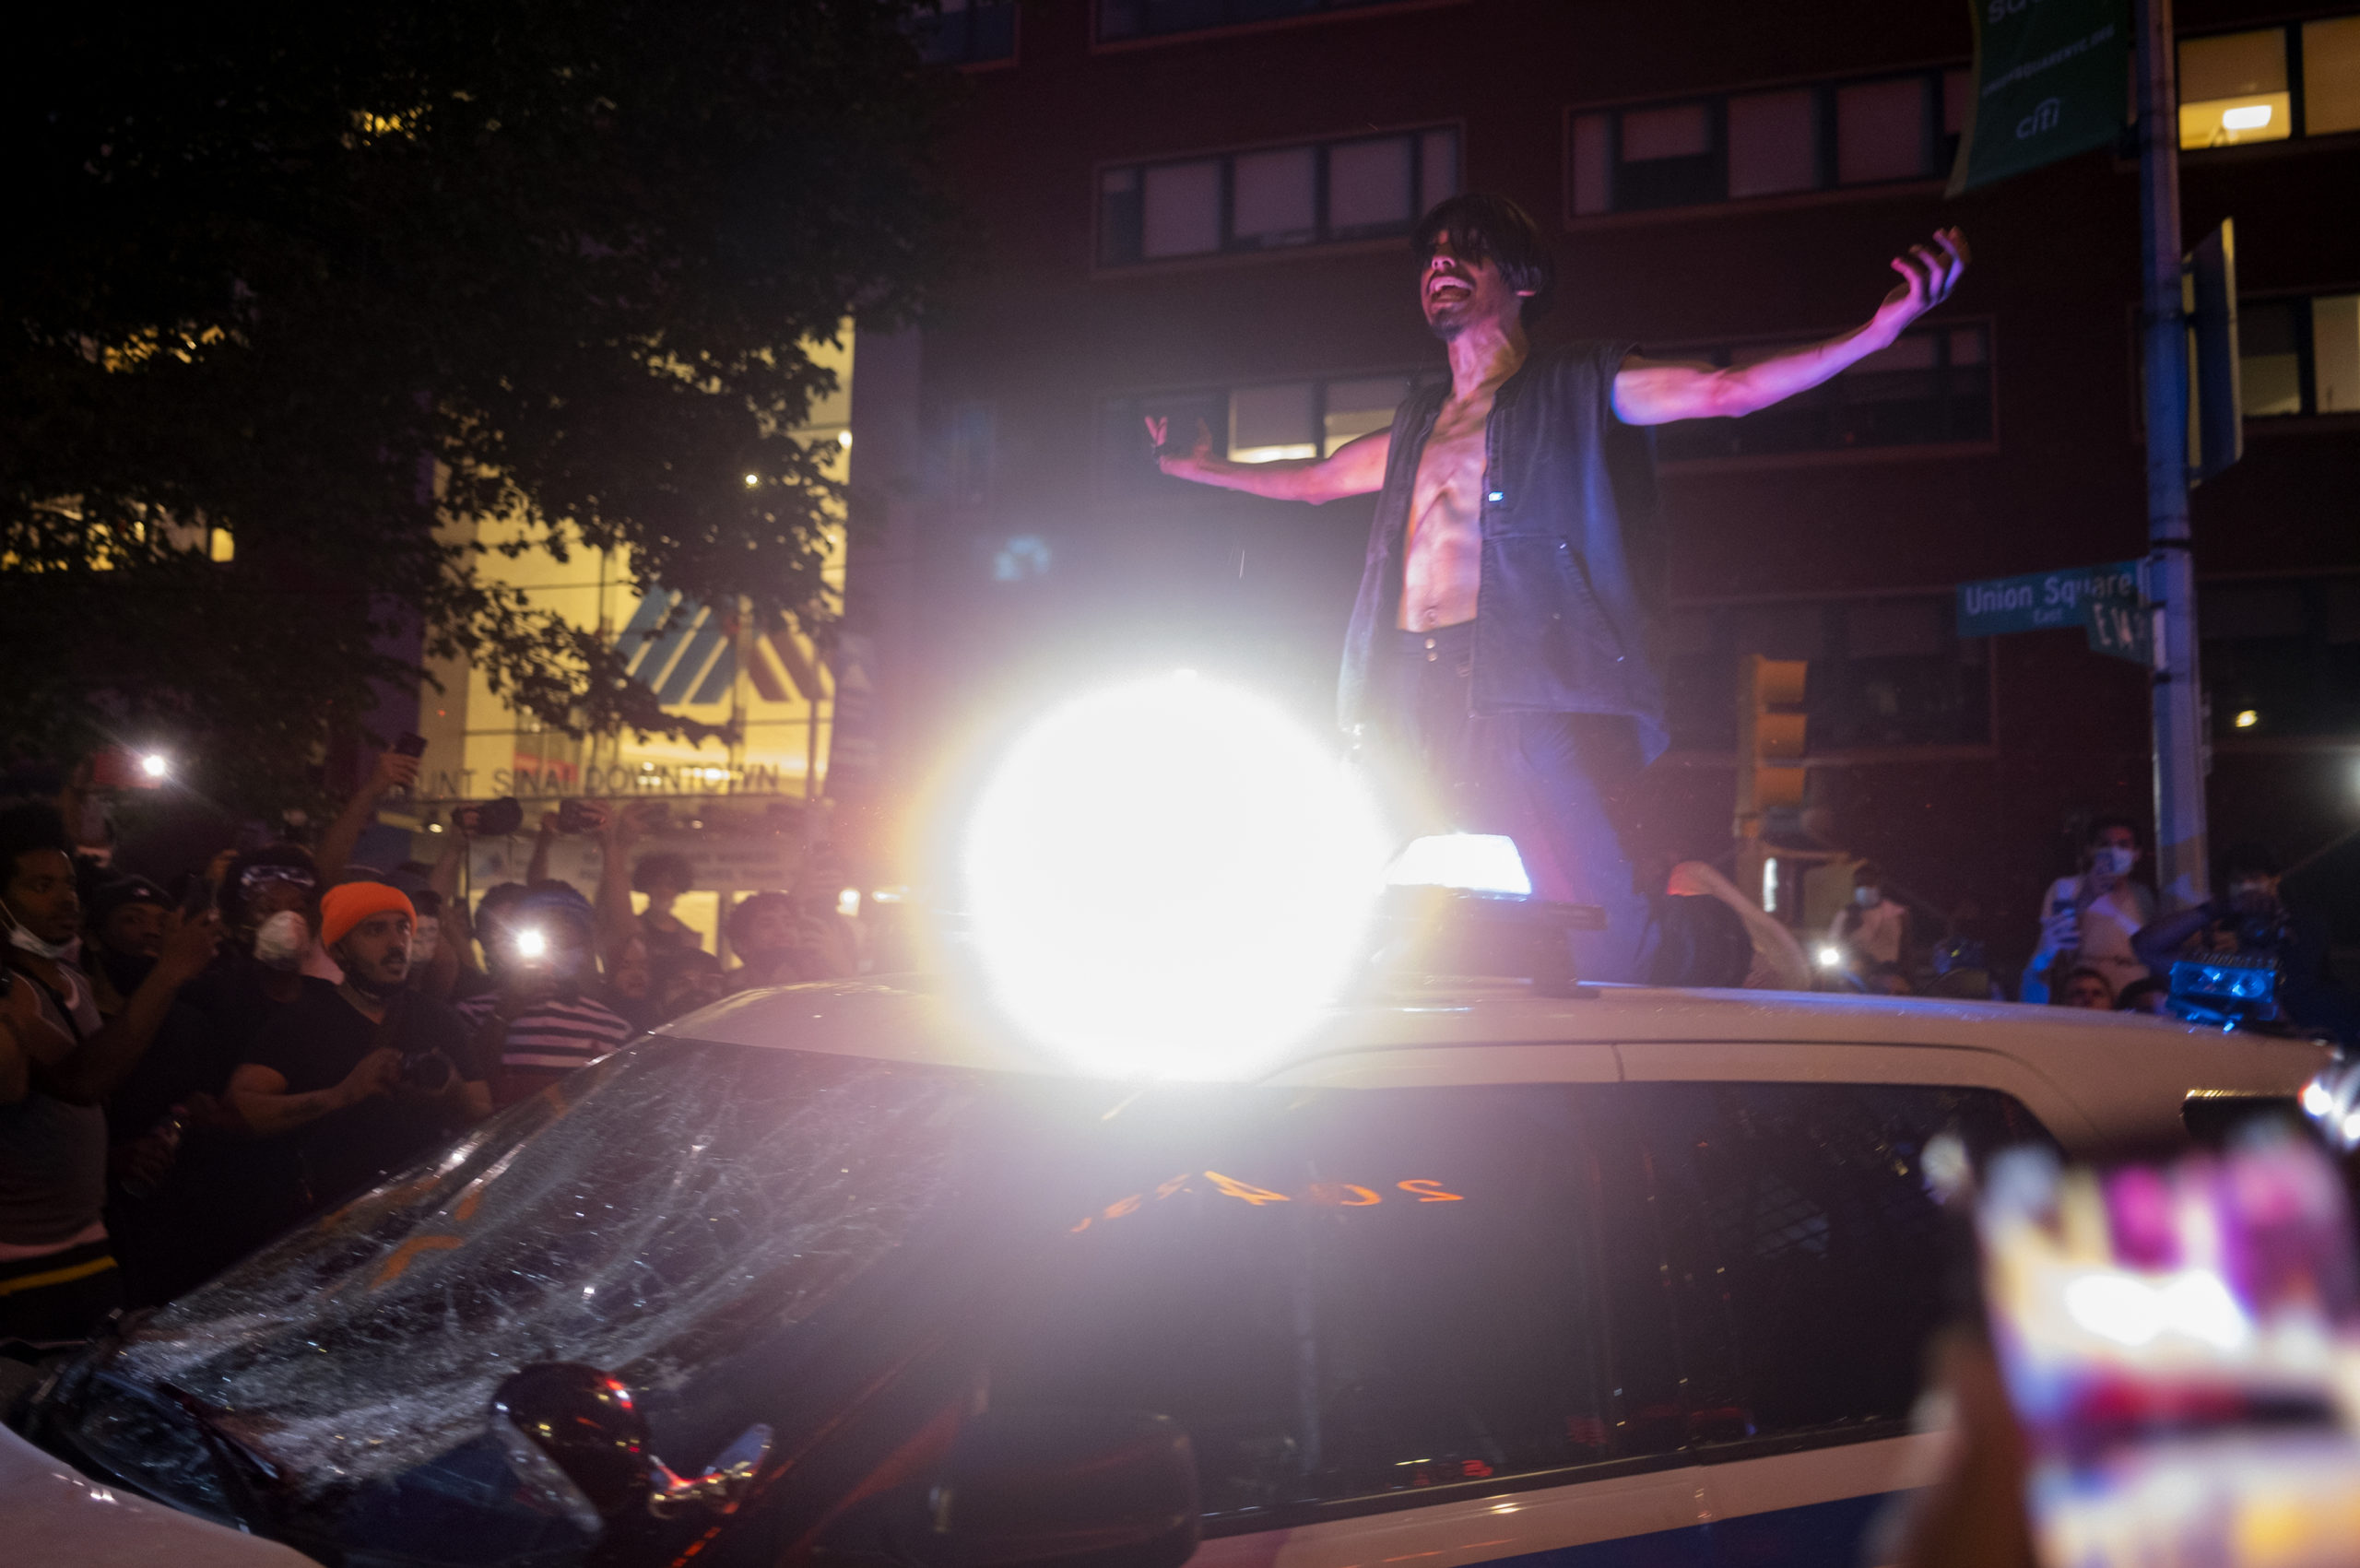 A protester gestures atop a damaged police vehicle near New York's Union Square, Saturday May 30, 2020, during a demonstration against the death of George Floyd, a black man who died in Minneapolis police custody on May 25. (AP Photo/Craig Ruttle)